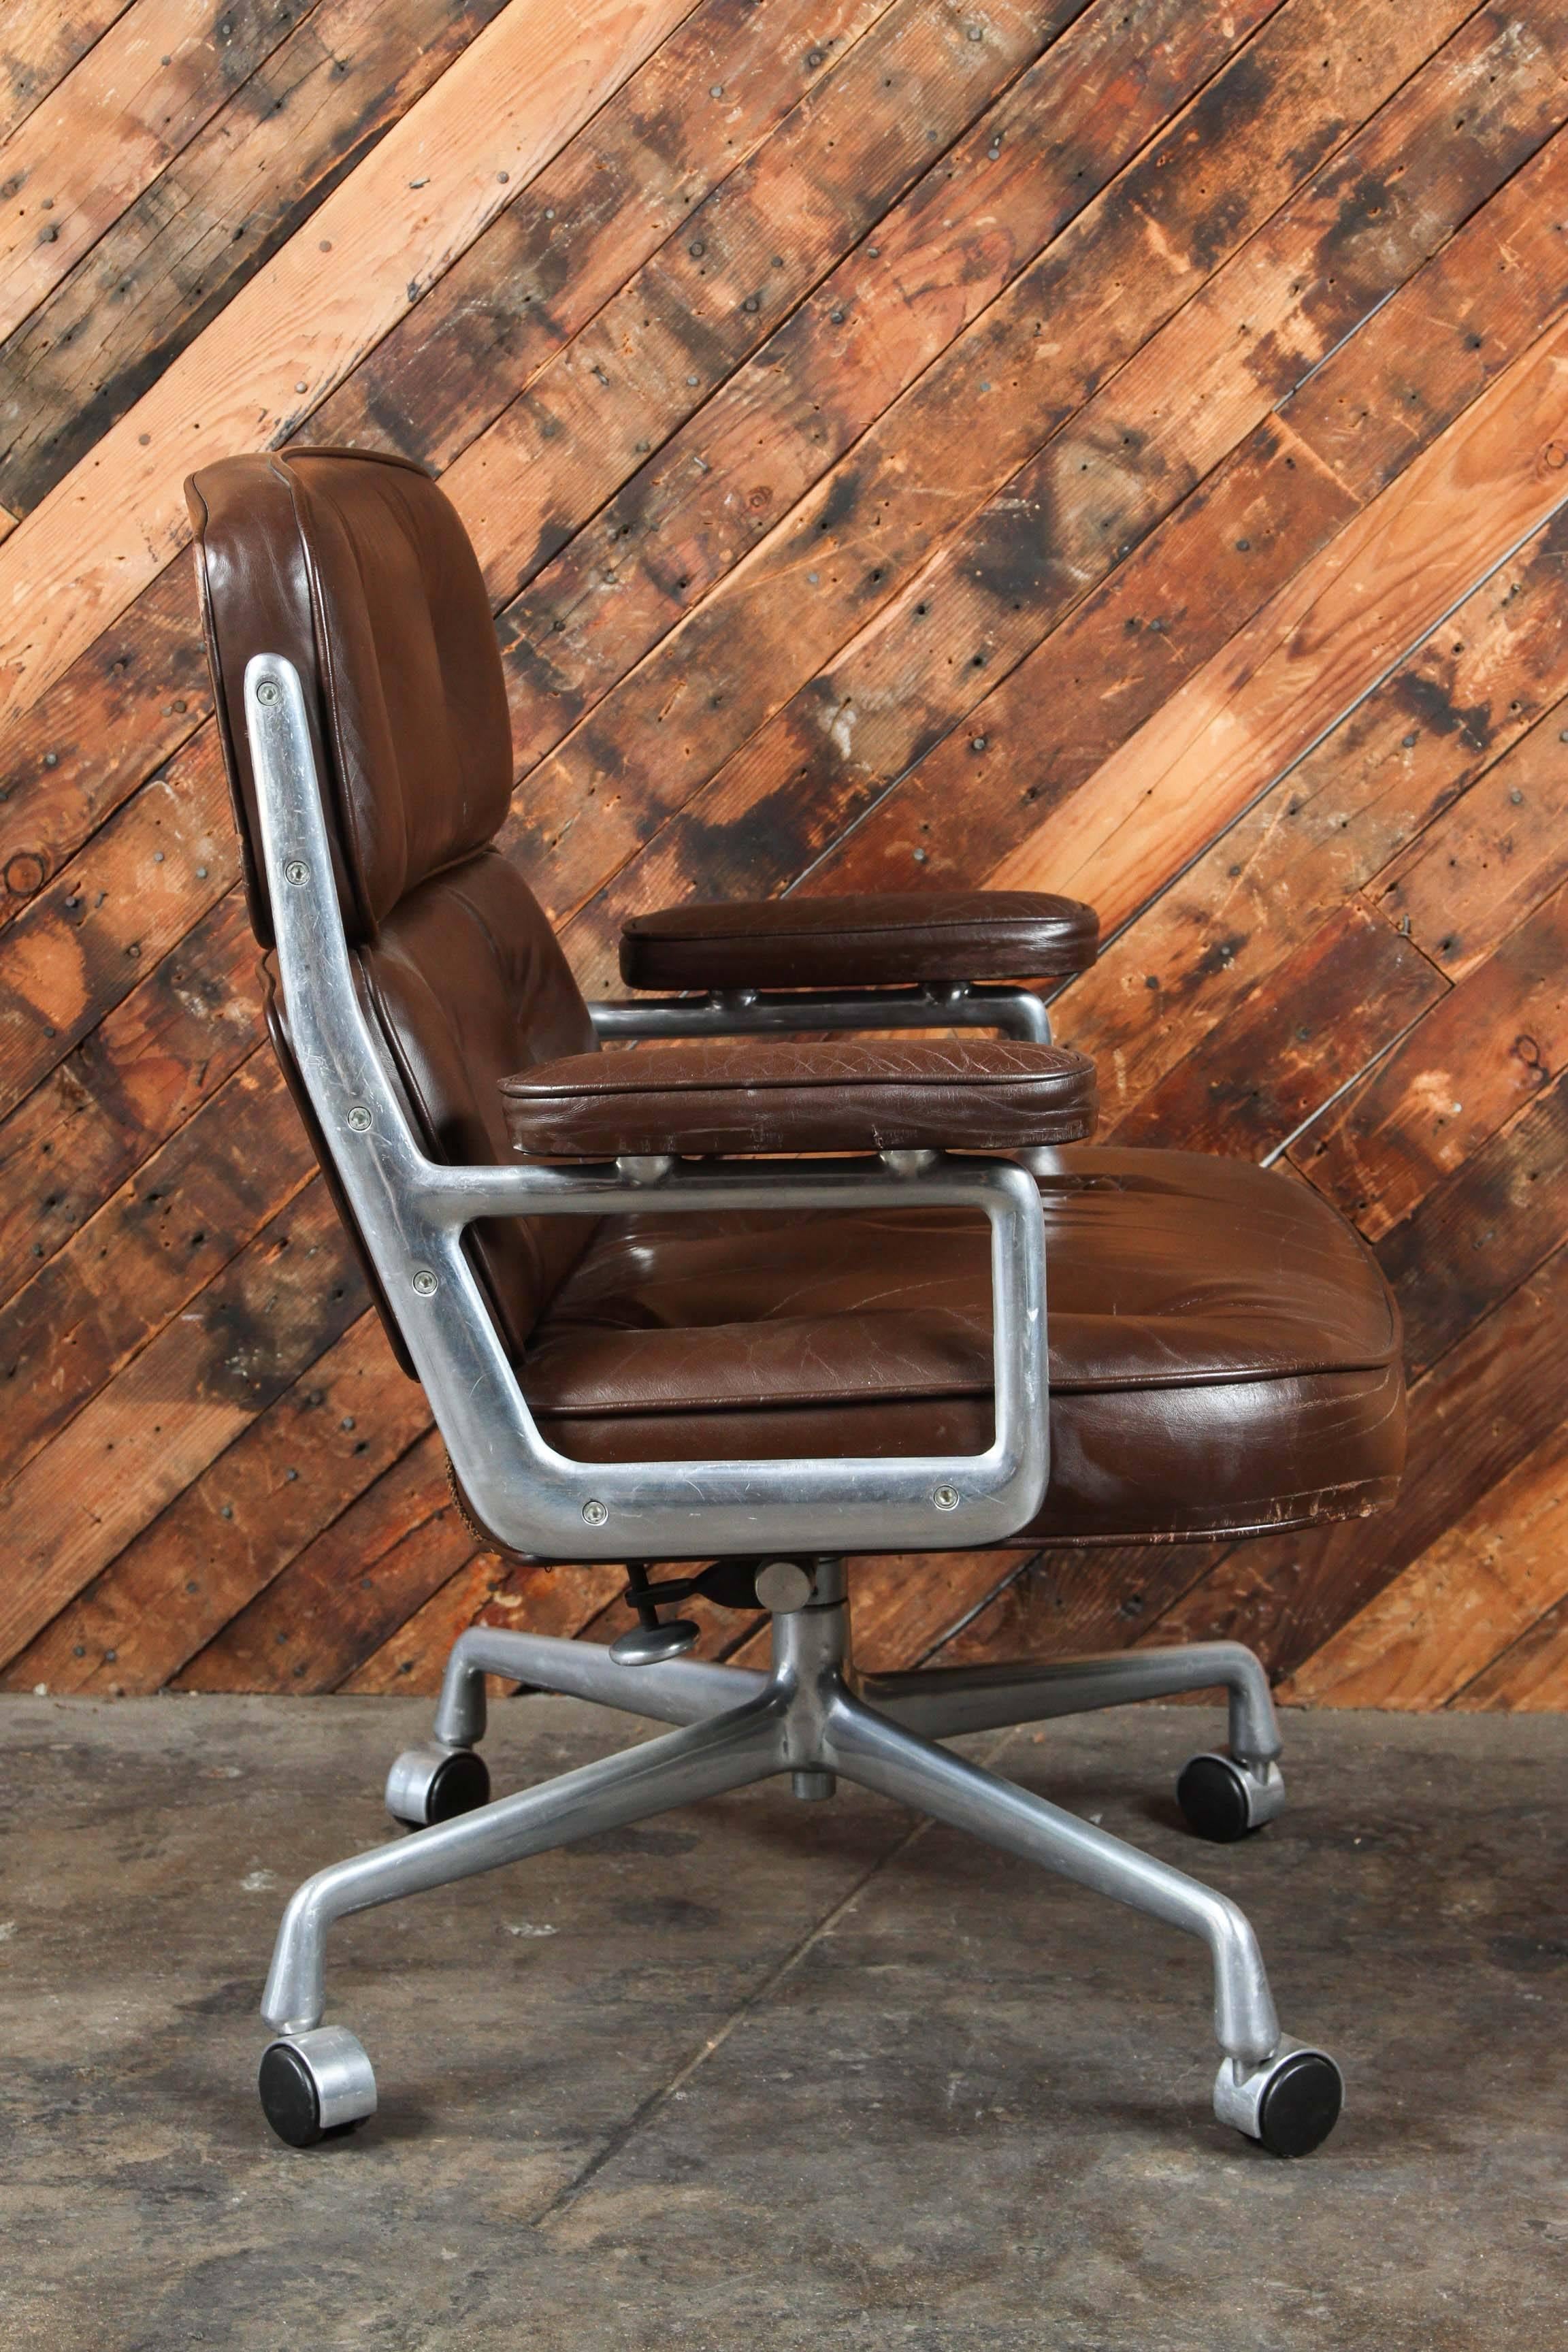 The most iconic office chair. Thick and comfortable pad. Designed by Charles & Ray Eames. These conference chairs were designed for the Time Life building in New York. Gorgeous rich brown leather shows a beautiful all-over patina with better than